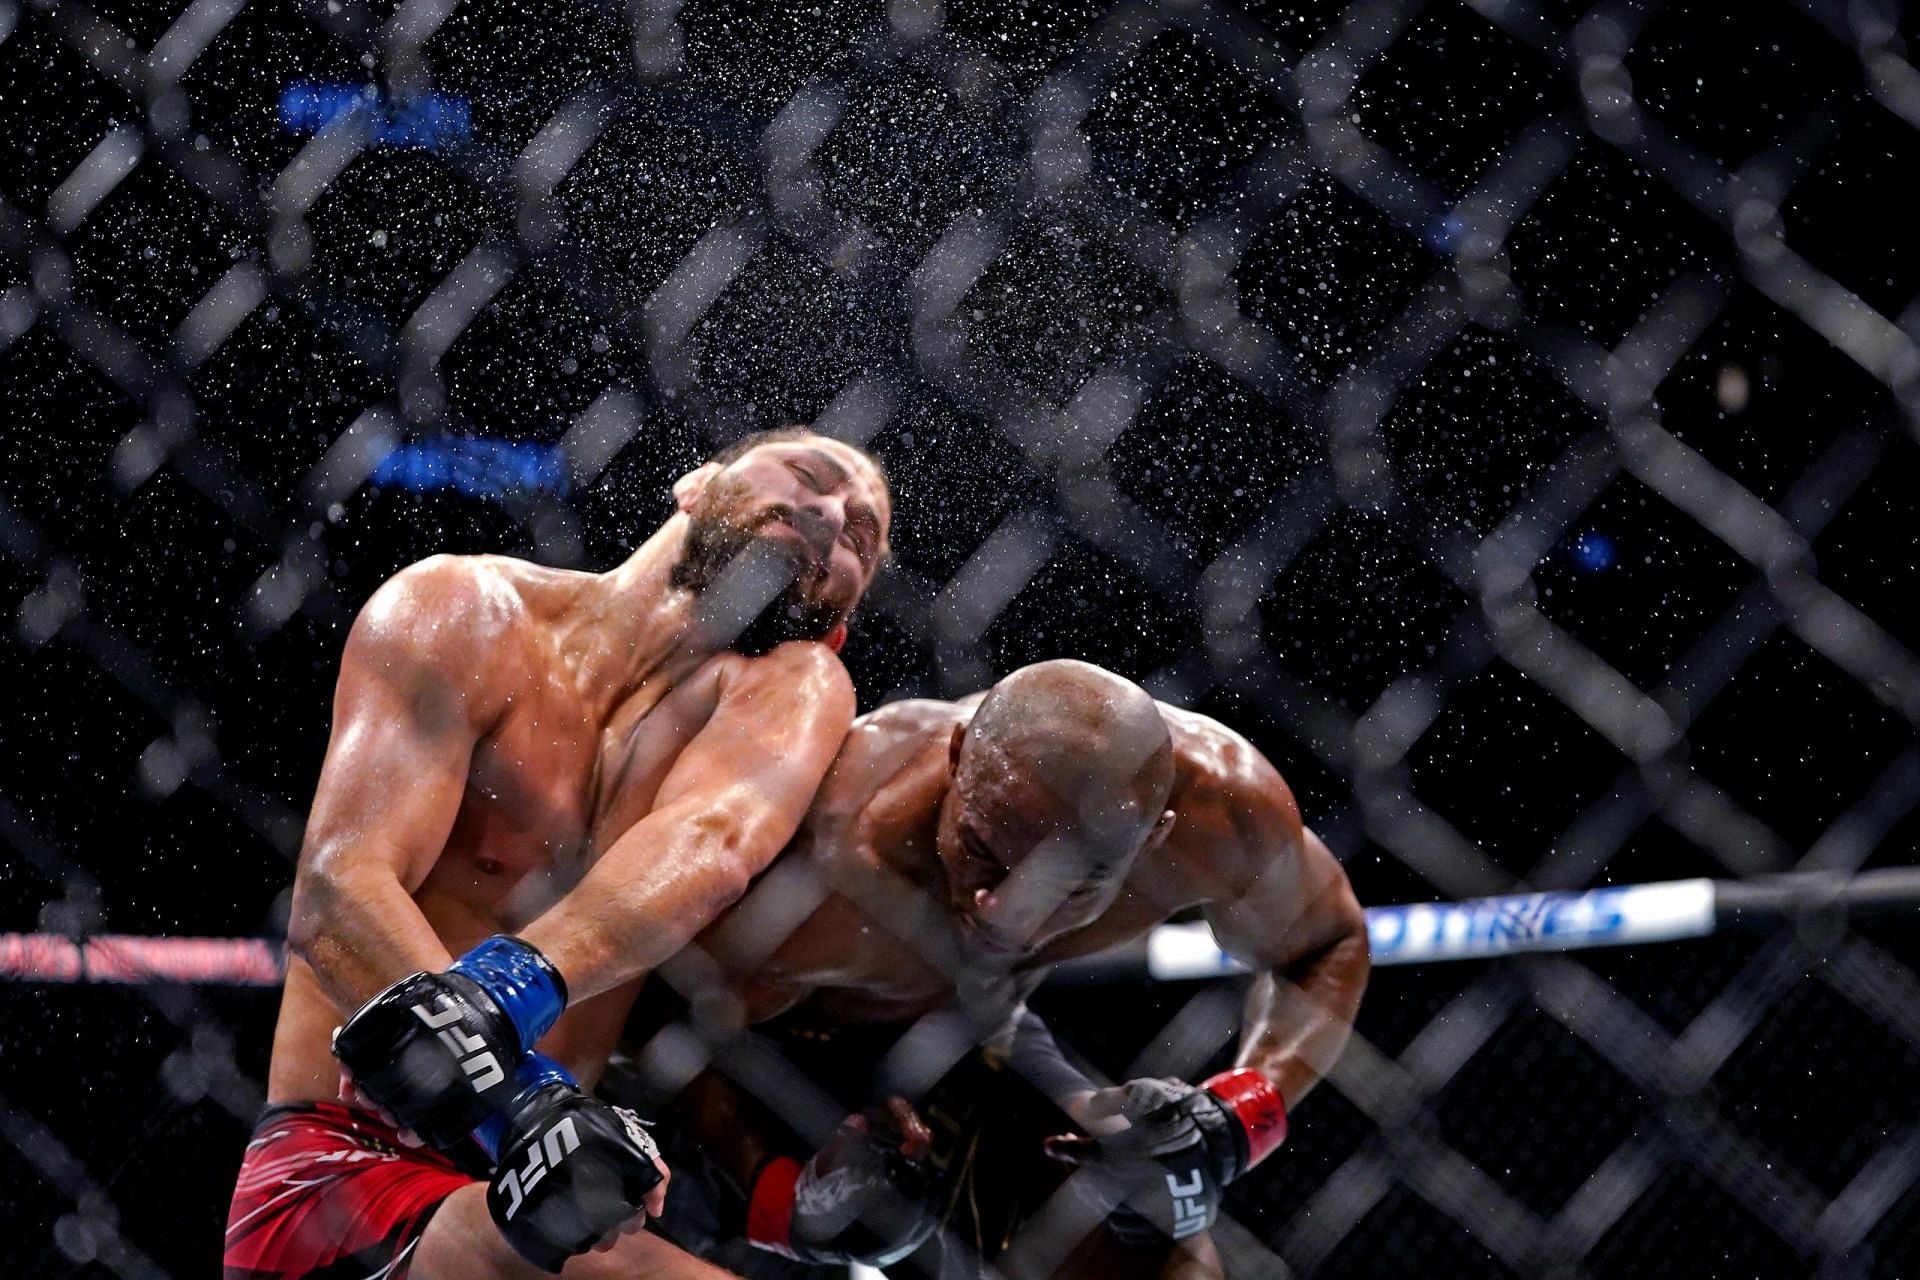 Kamaru Usman almost decapitated Jorge Masvidal in their second bout, rendering the knockout artist unconscious